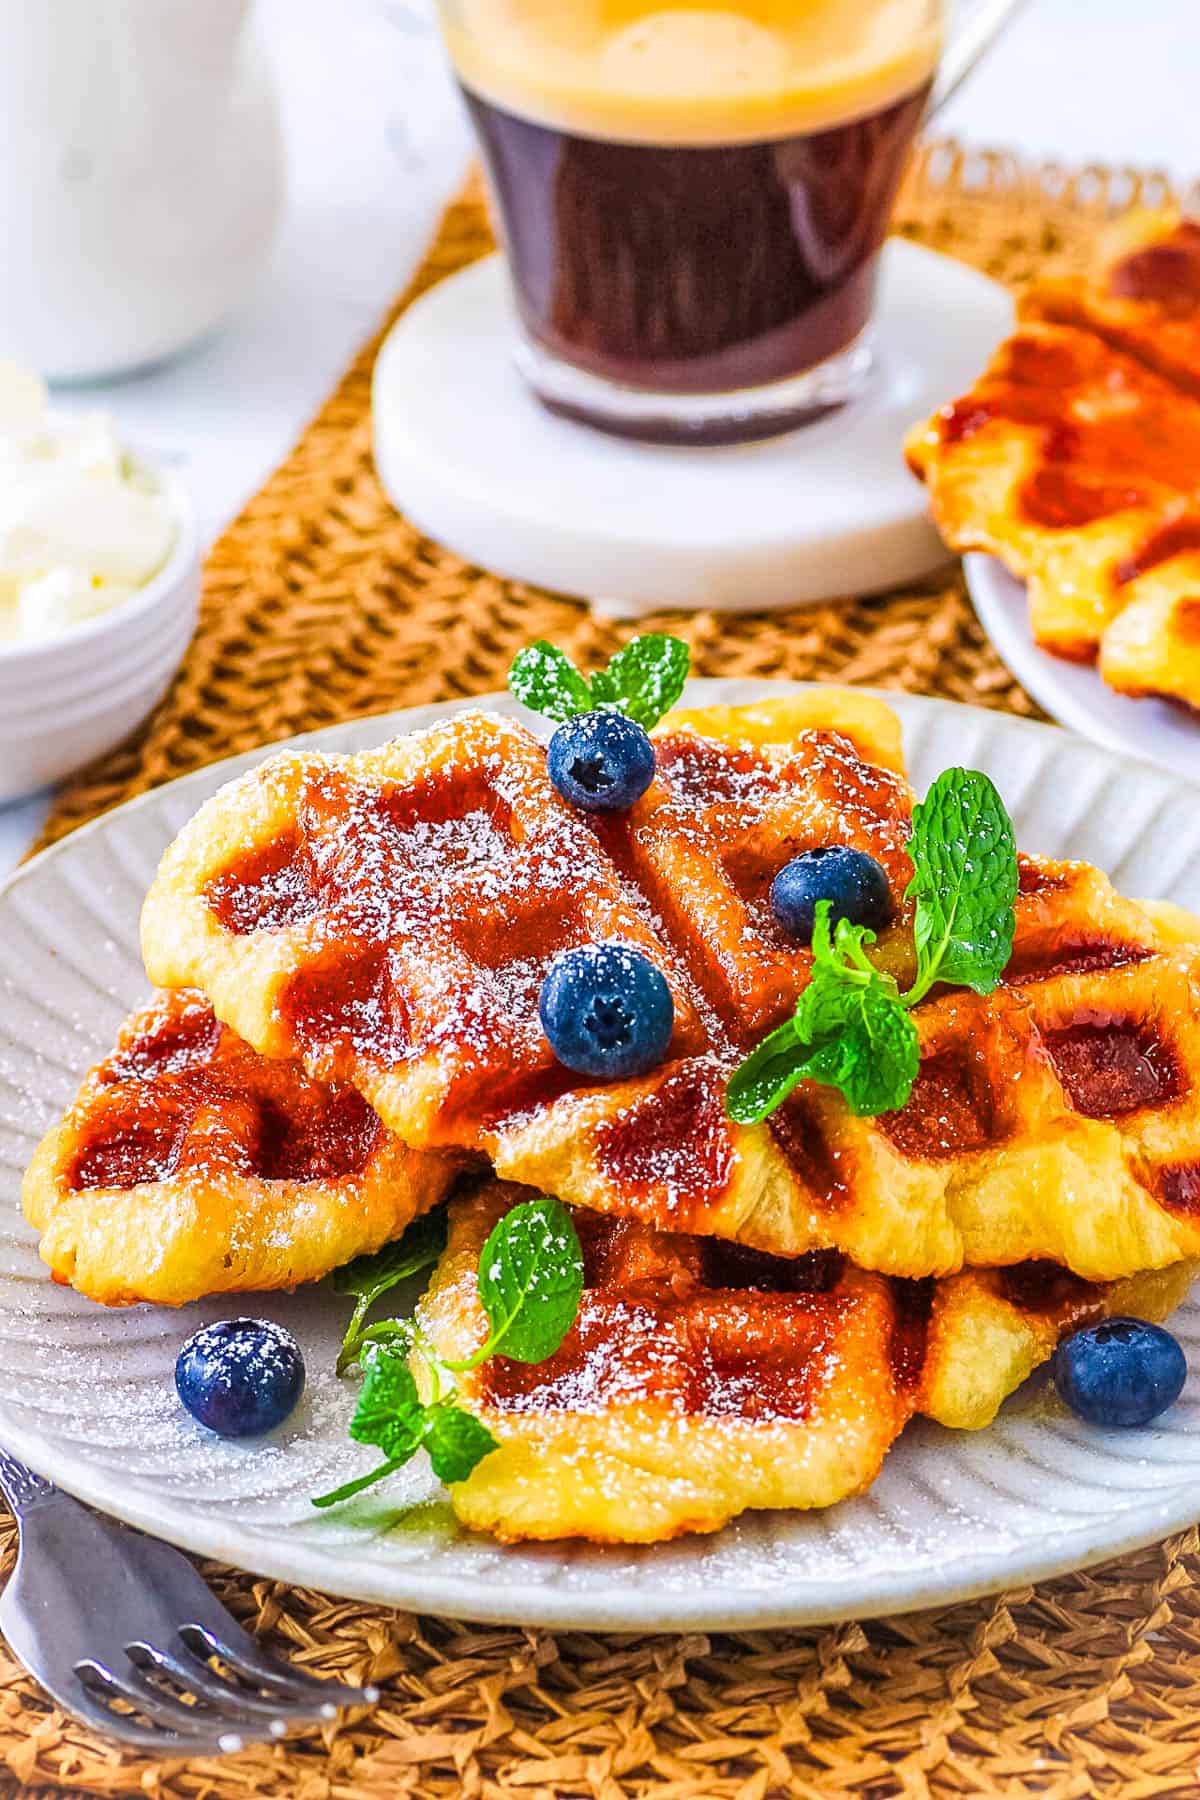 Easy croffles stacked on a white plate, topped with powdered sugar, garnished with blueberries and mint.